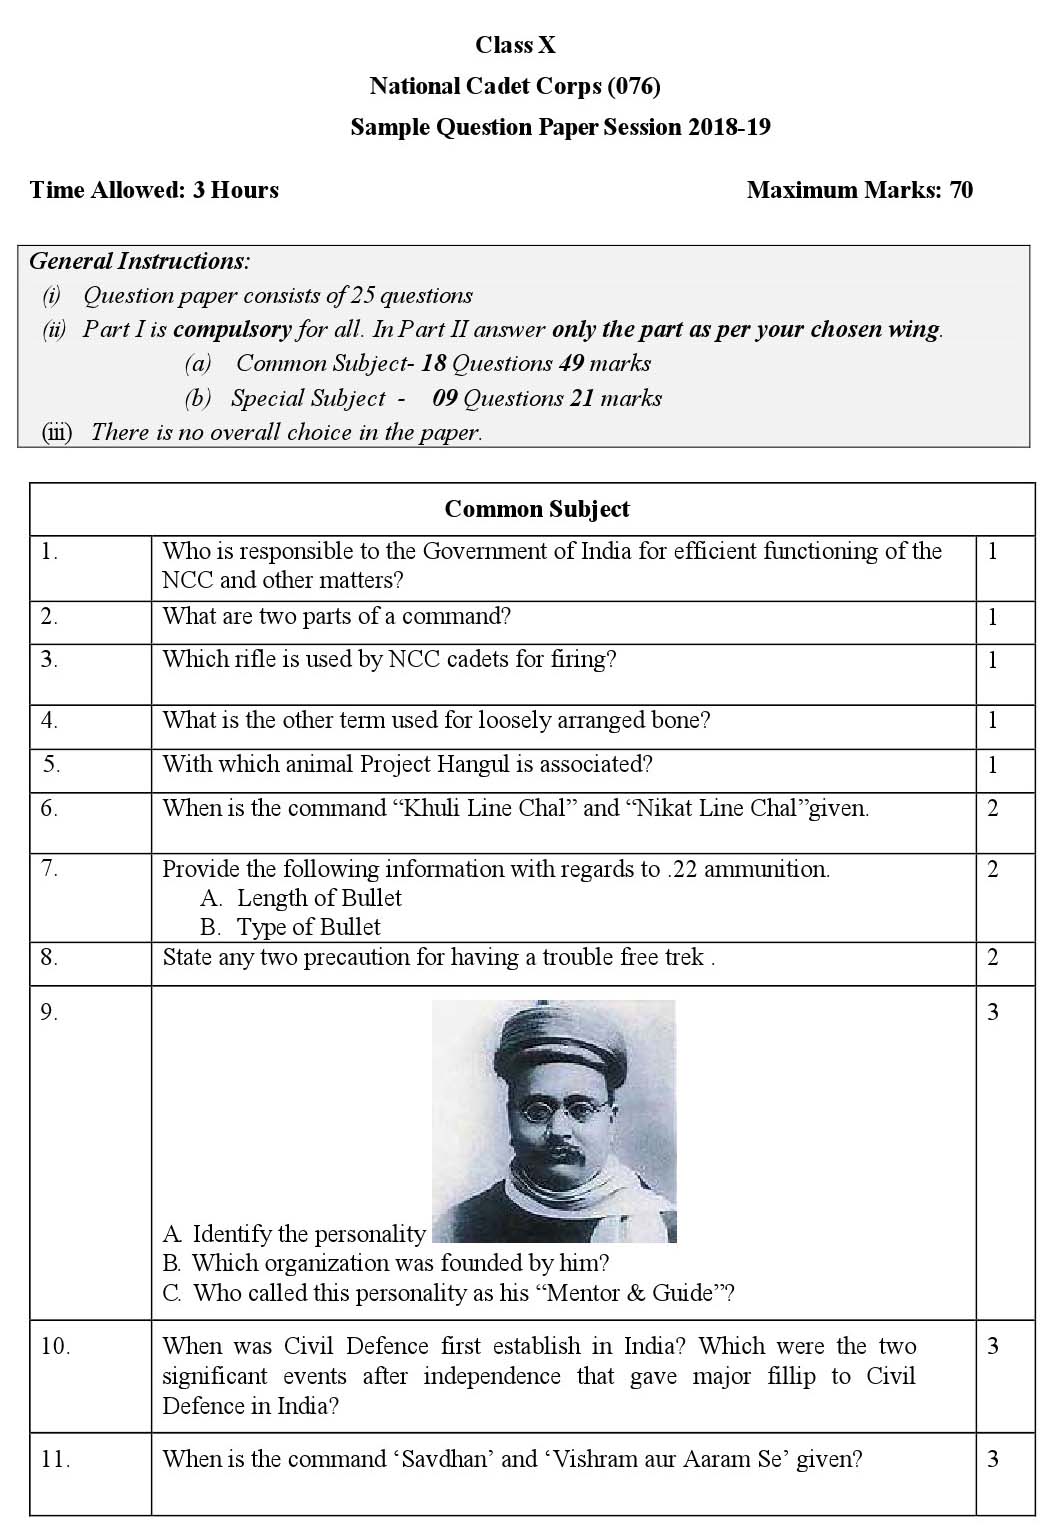 National Cadet Corps CBSE Class X Sample Question Paper 2018-19 - Image 1